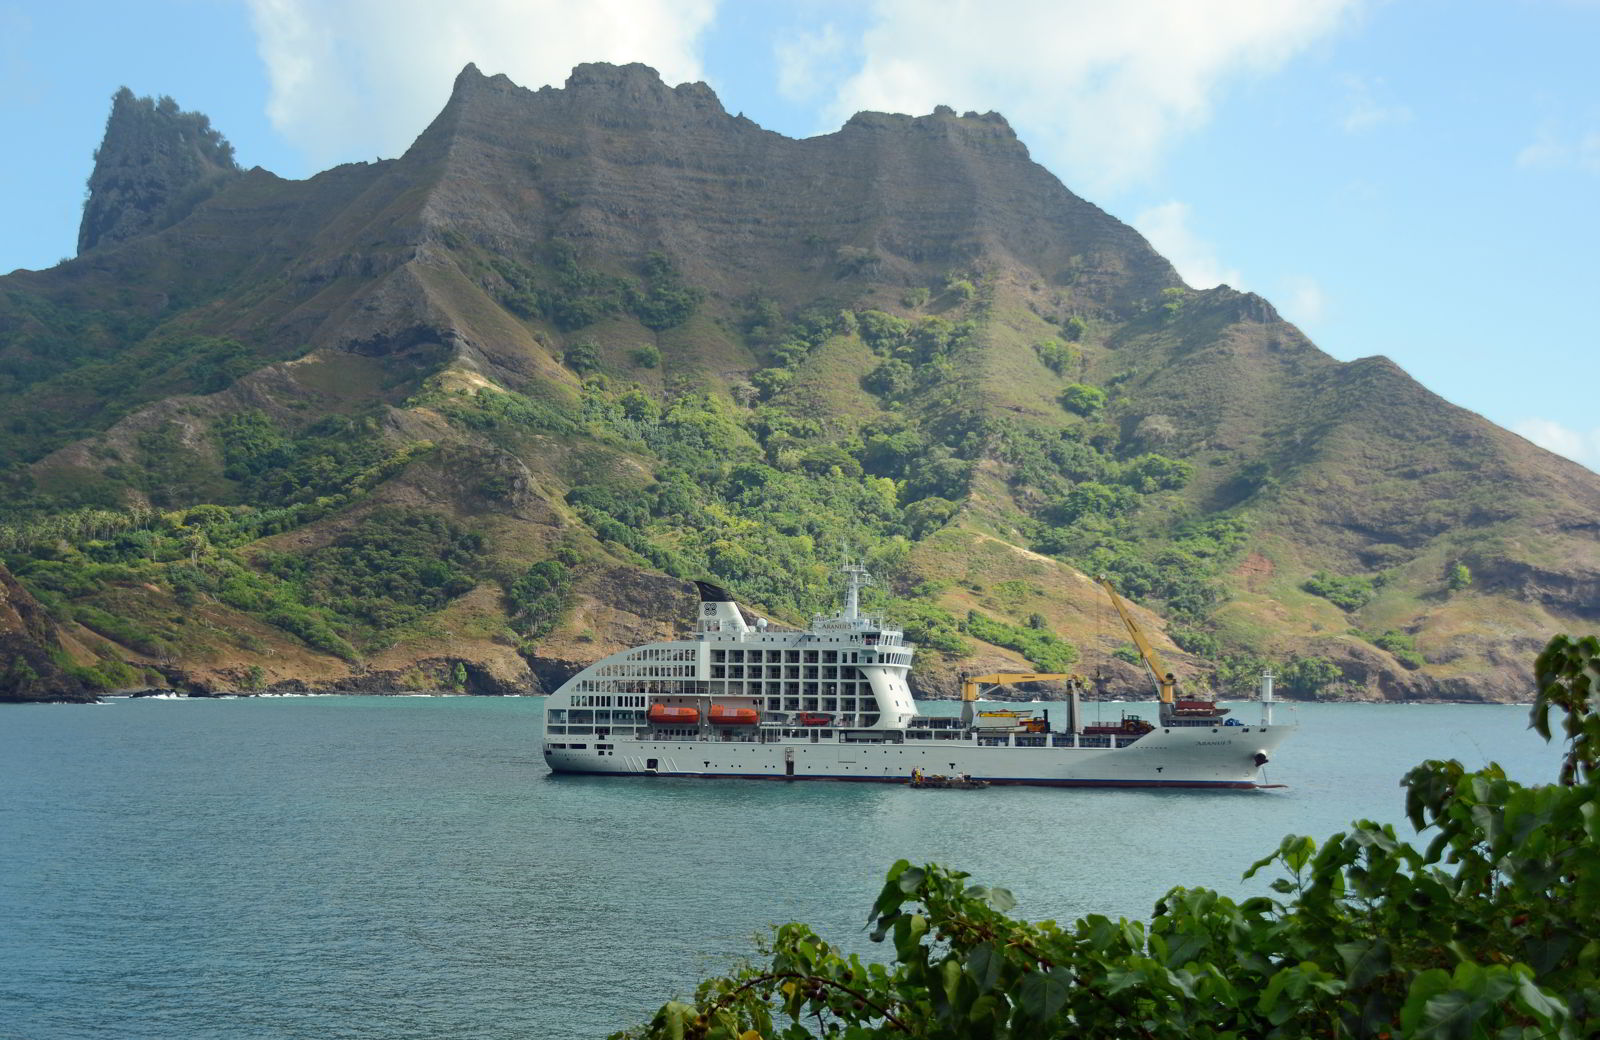 An image of Aranui 5, a ship that is half freighter ship have passenger cruise ship.